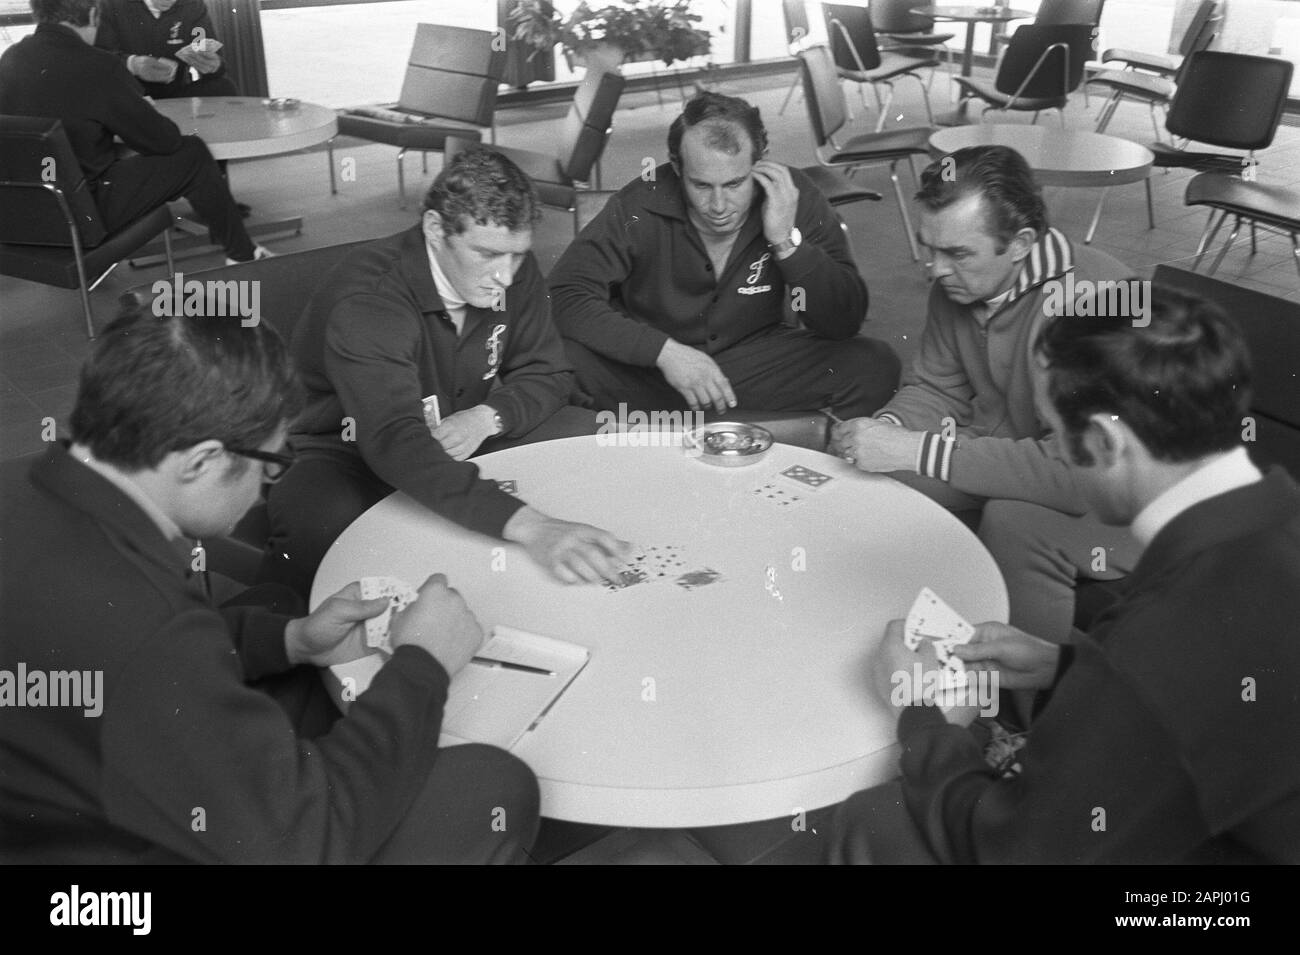 the team of Feijenoord trains in sports centre Zeist for the match against Legia-Warsaw Description: Players put a ticket with trainer Happel Date: 14 april 1970 Location: Utrecht, Zeist Keywords: playing cards, sports centers, trainers, football Person name: Happel, Ernst Stock Photo